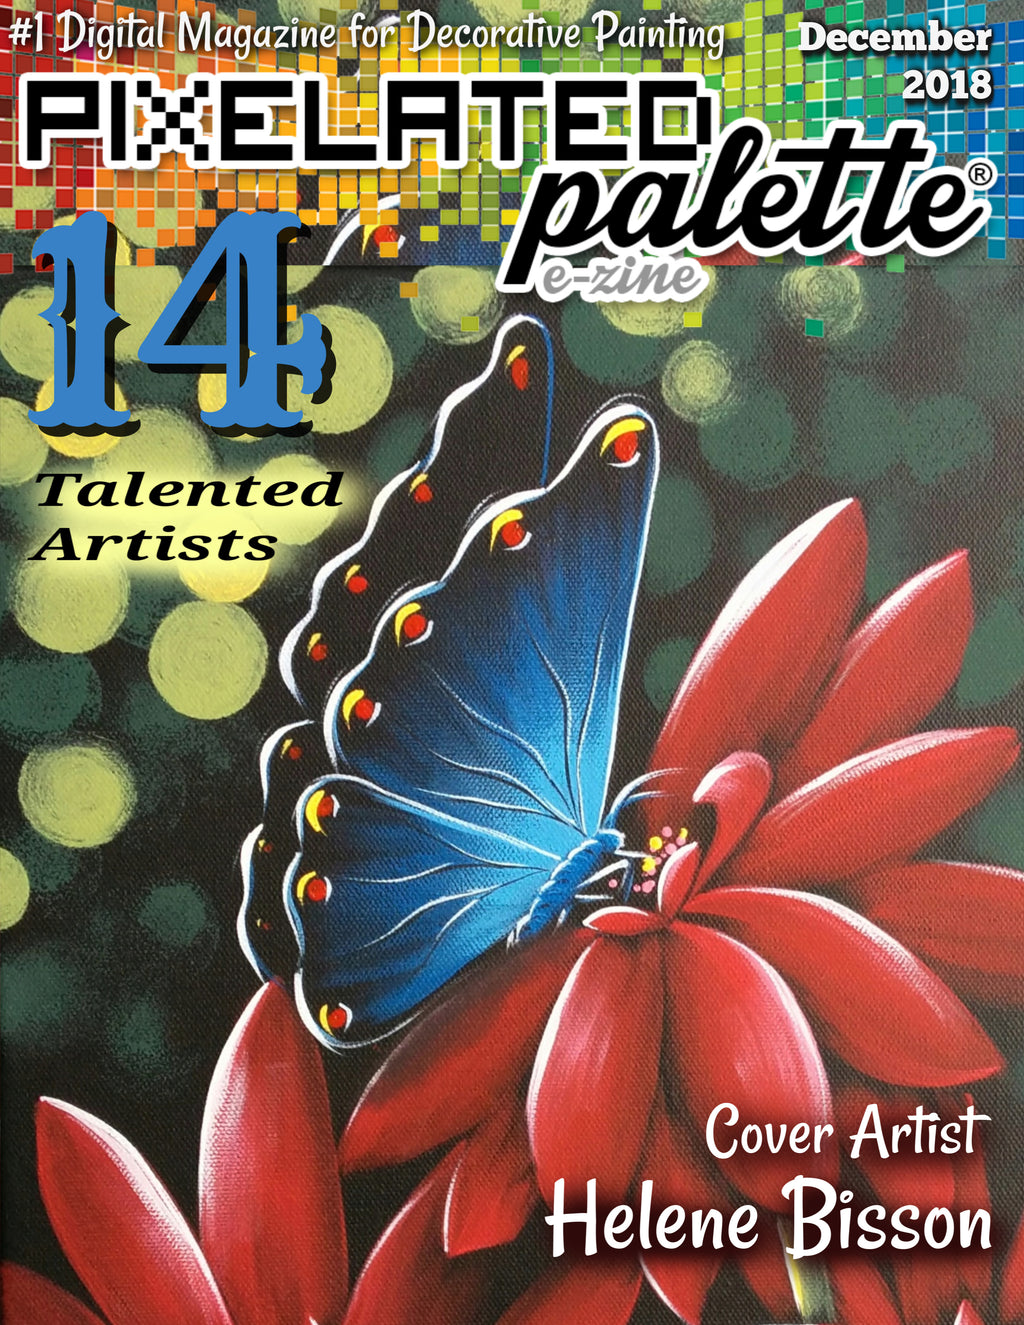 Pixelated Palette - December 2018 Issue Download